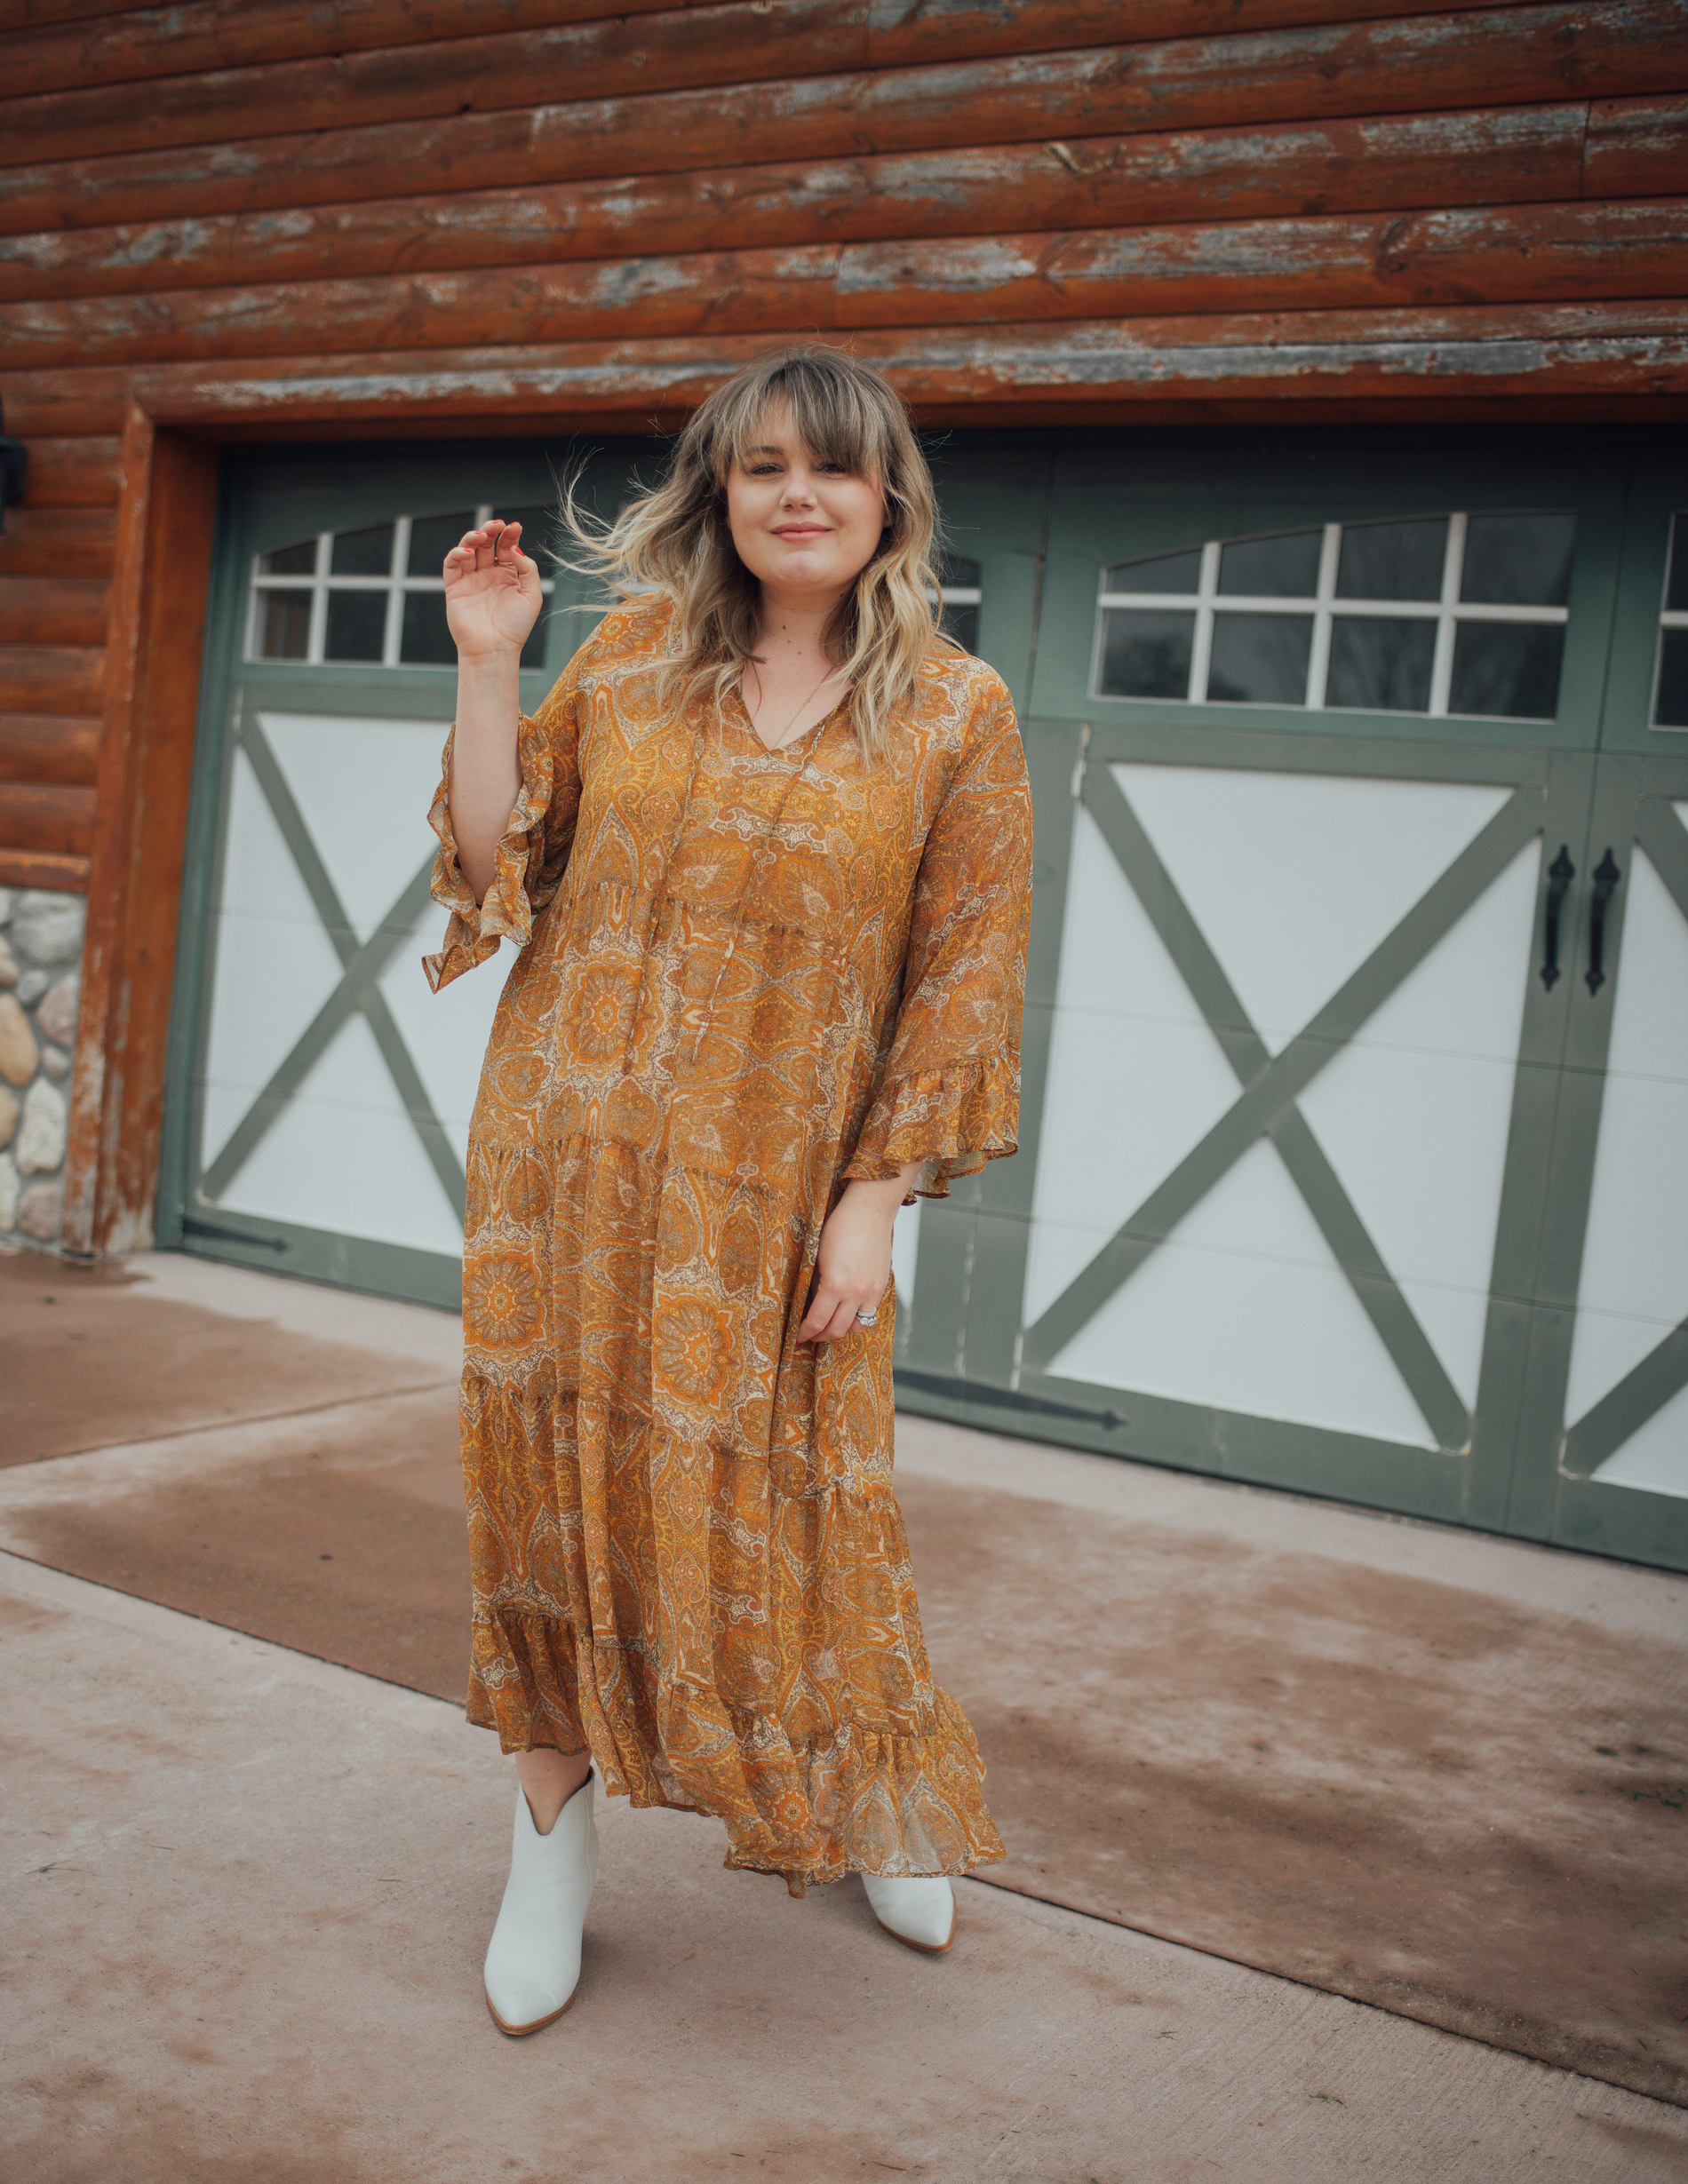 Sharing a roundup of plus size boho maxi dresses! Summer is a great time to try out boho style dresses with a sandal and minimal jewelry! 